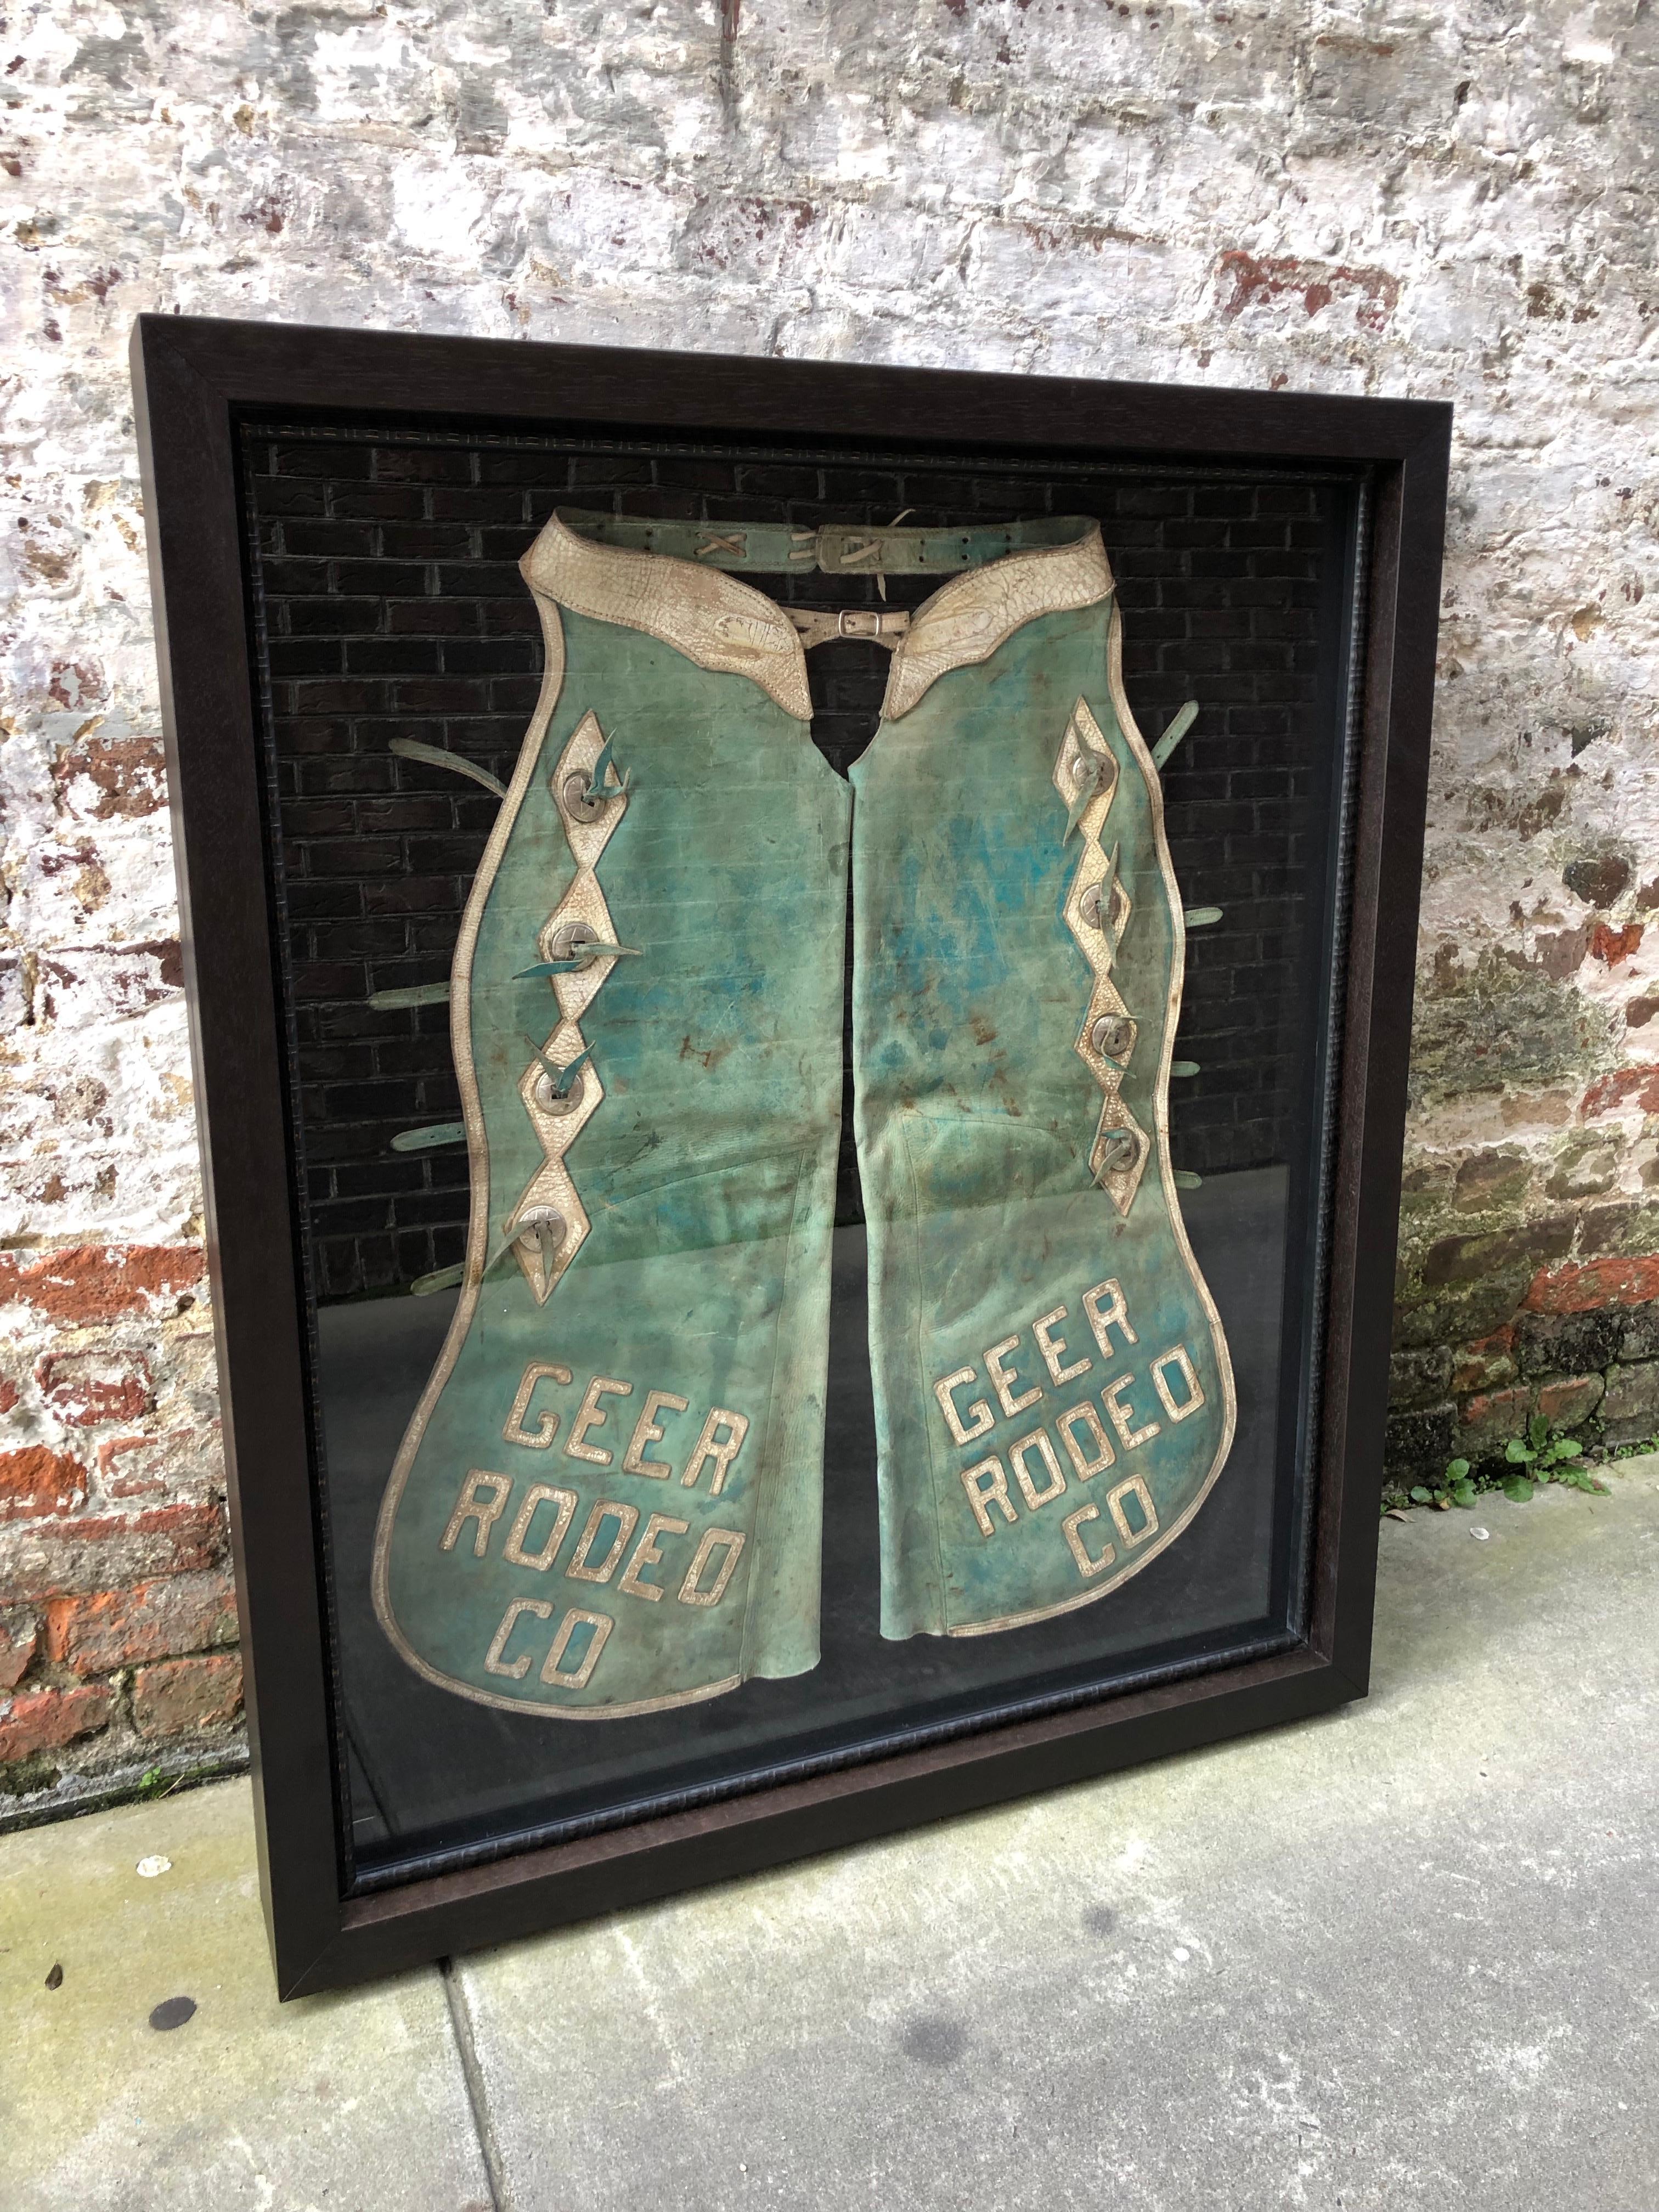 Pair of faded turquoise chaps with silver mounts with Geer Rodeo Company.